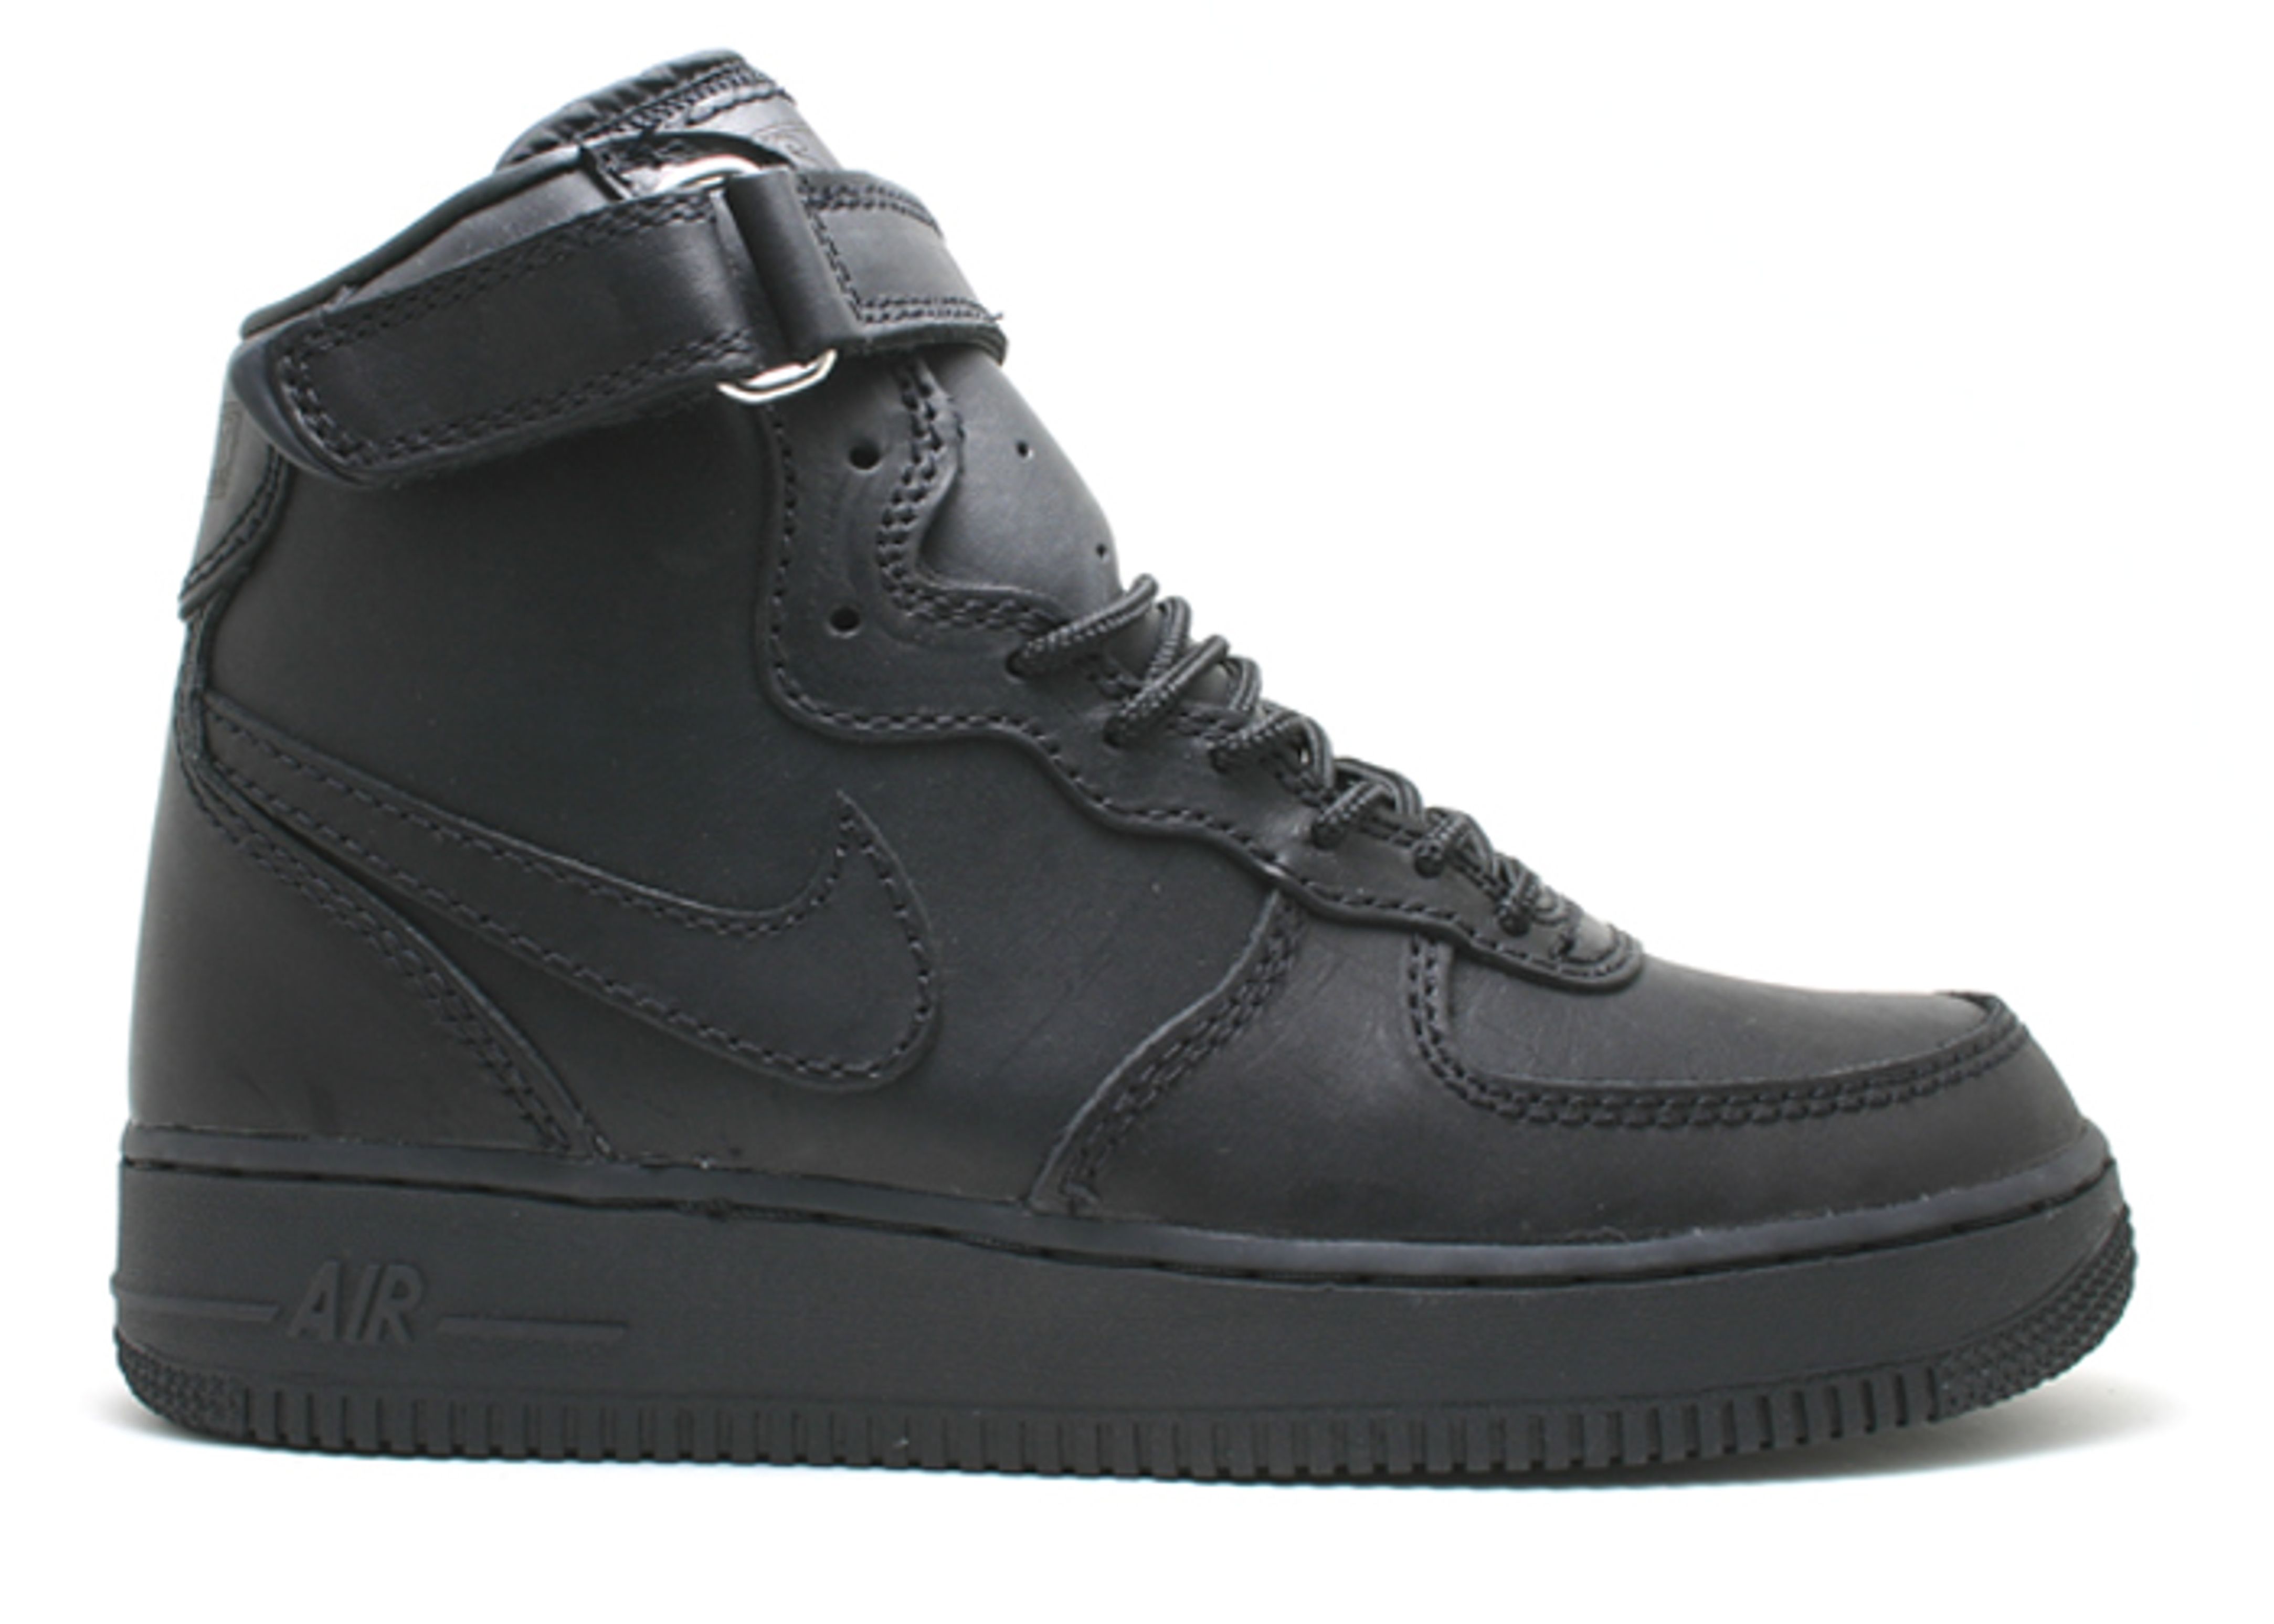 nike air force steel toe boots